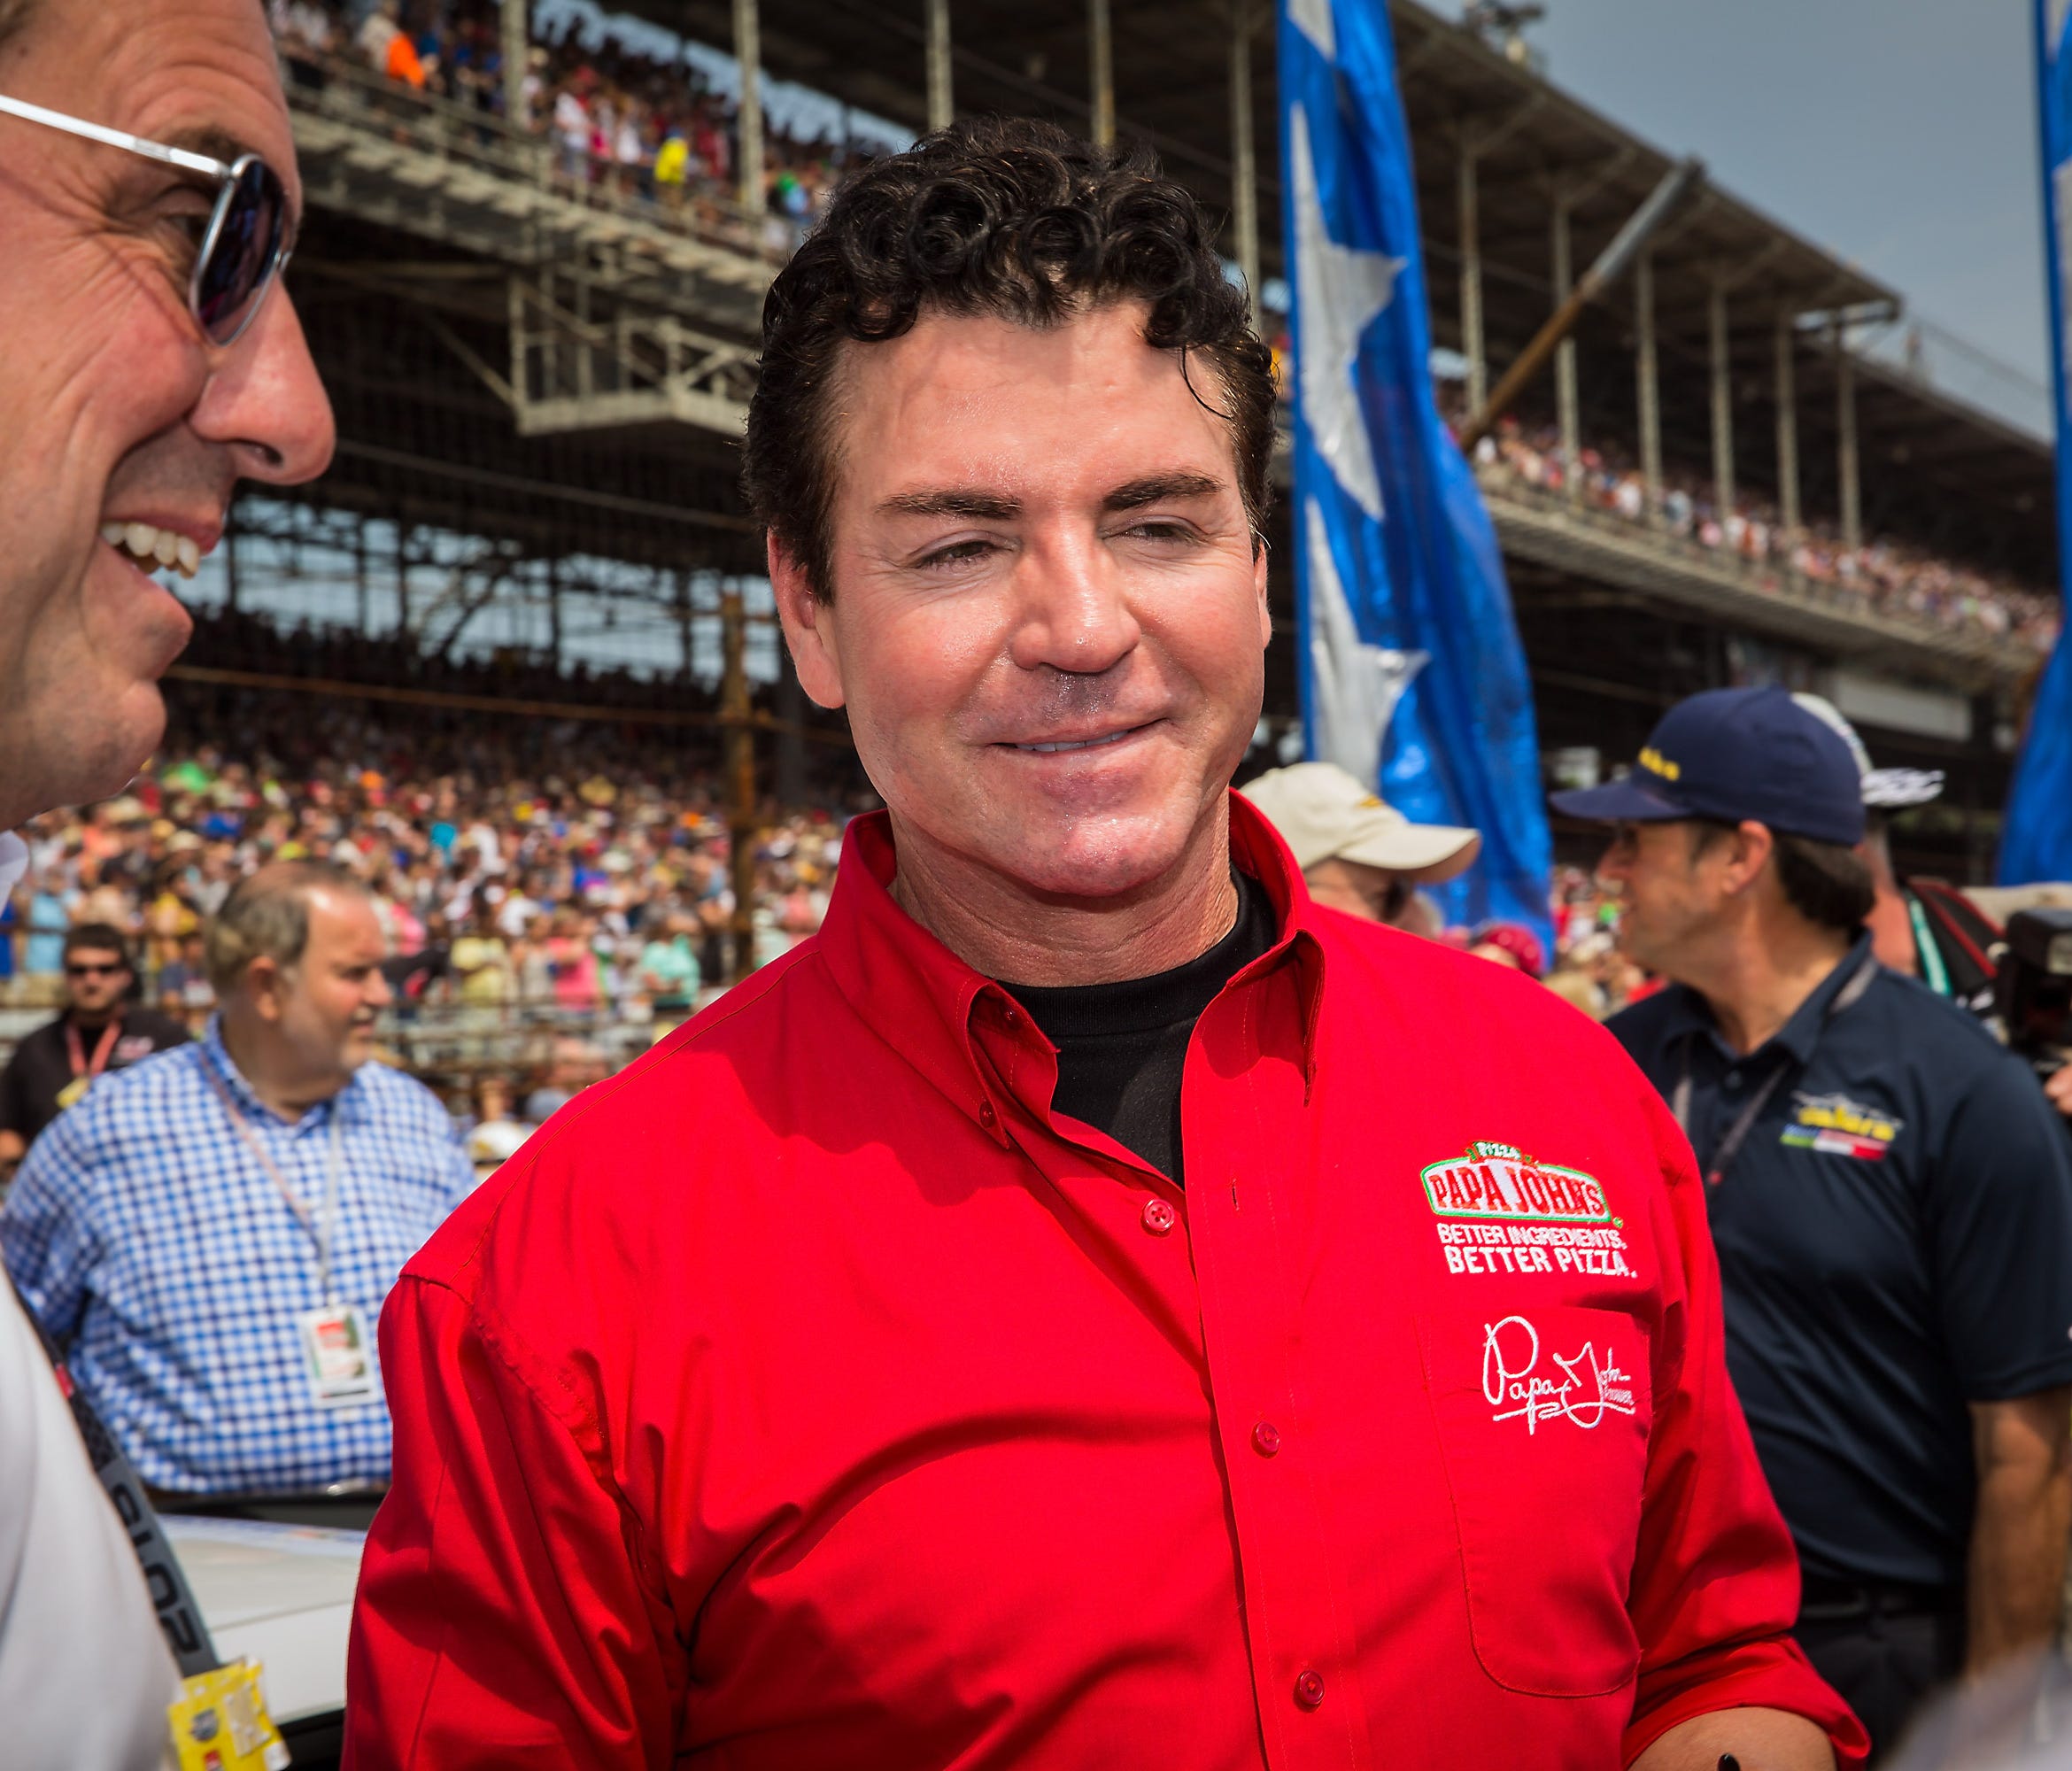 John Schnatter attends the Indy 500 on May 23, 2015, in Indianapolis. The Papa John's founder recently resigned in disgrace from his company's chairmanship.